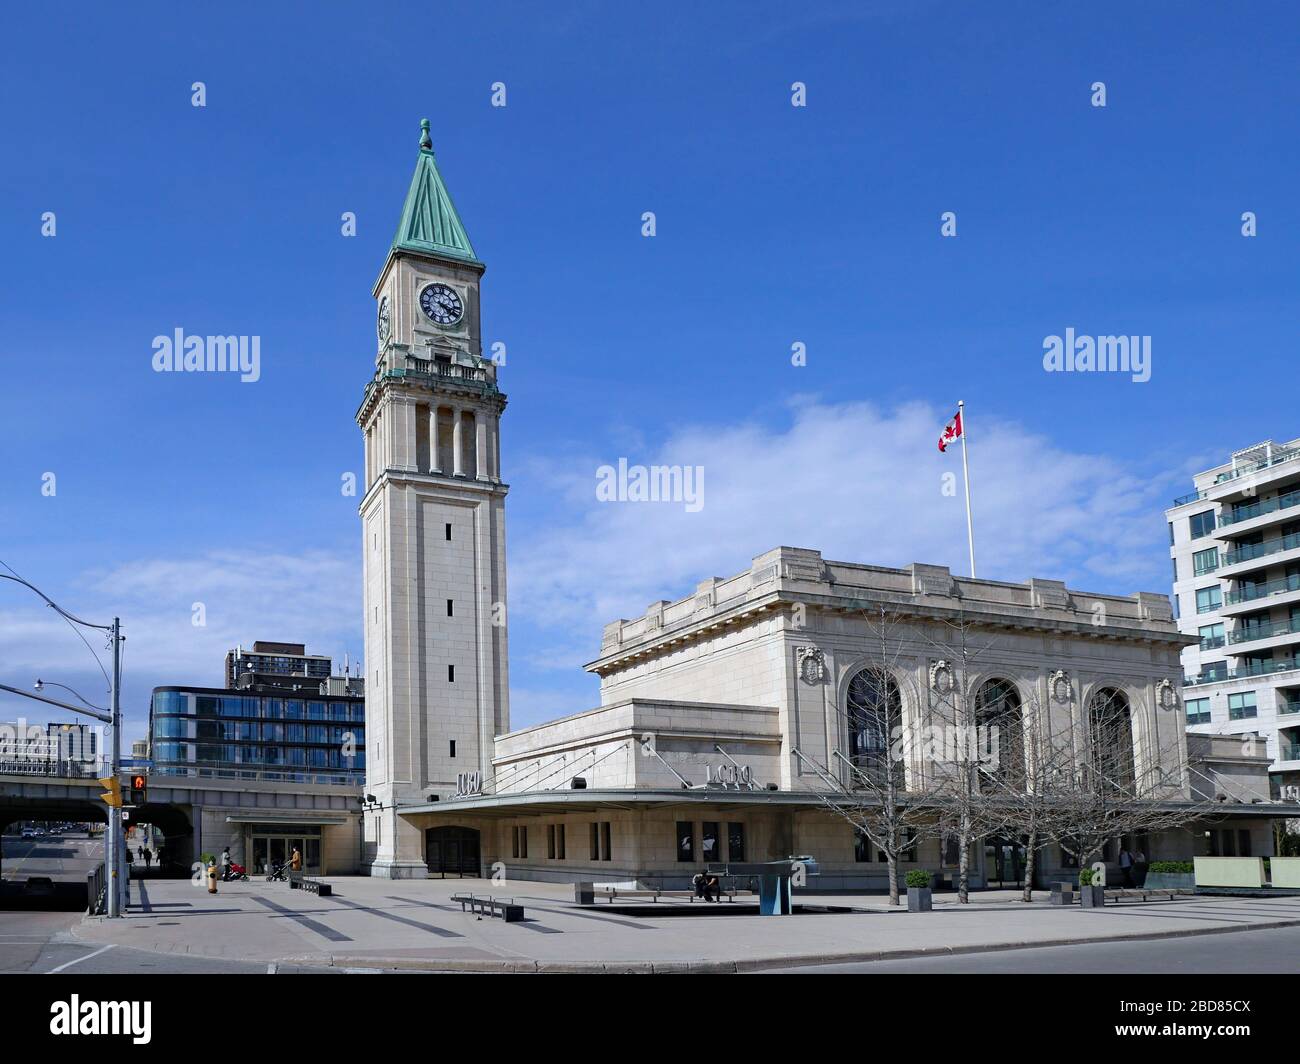 TORONTO - APRIL 2020:  The Beaux Arts style North Toronto railway station built in 1916 has been converted into a liquor store. Stock Photo